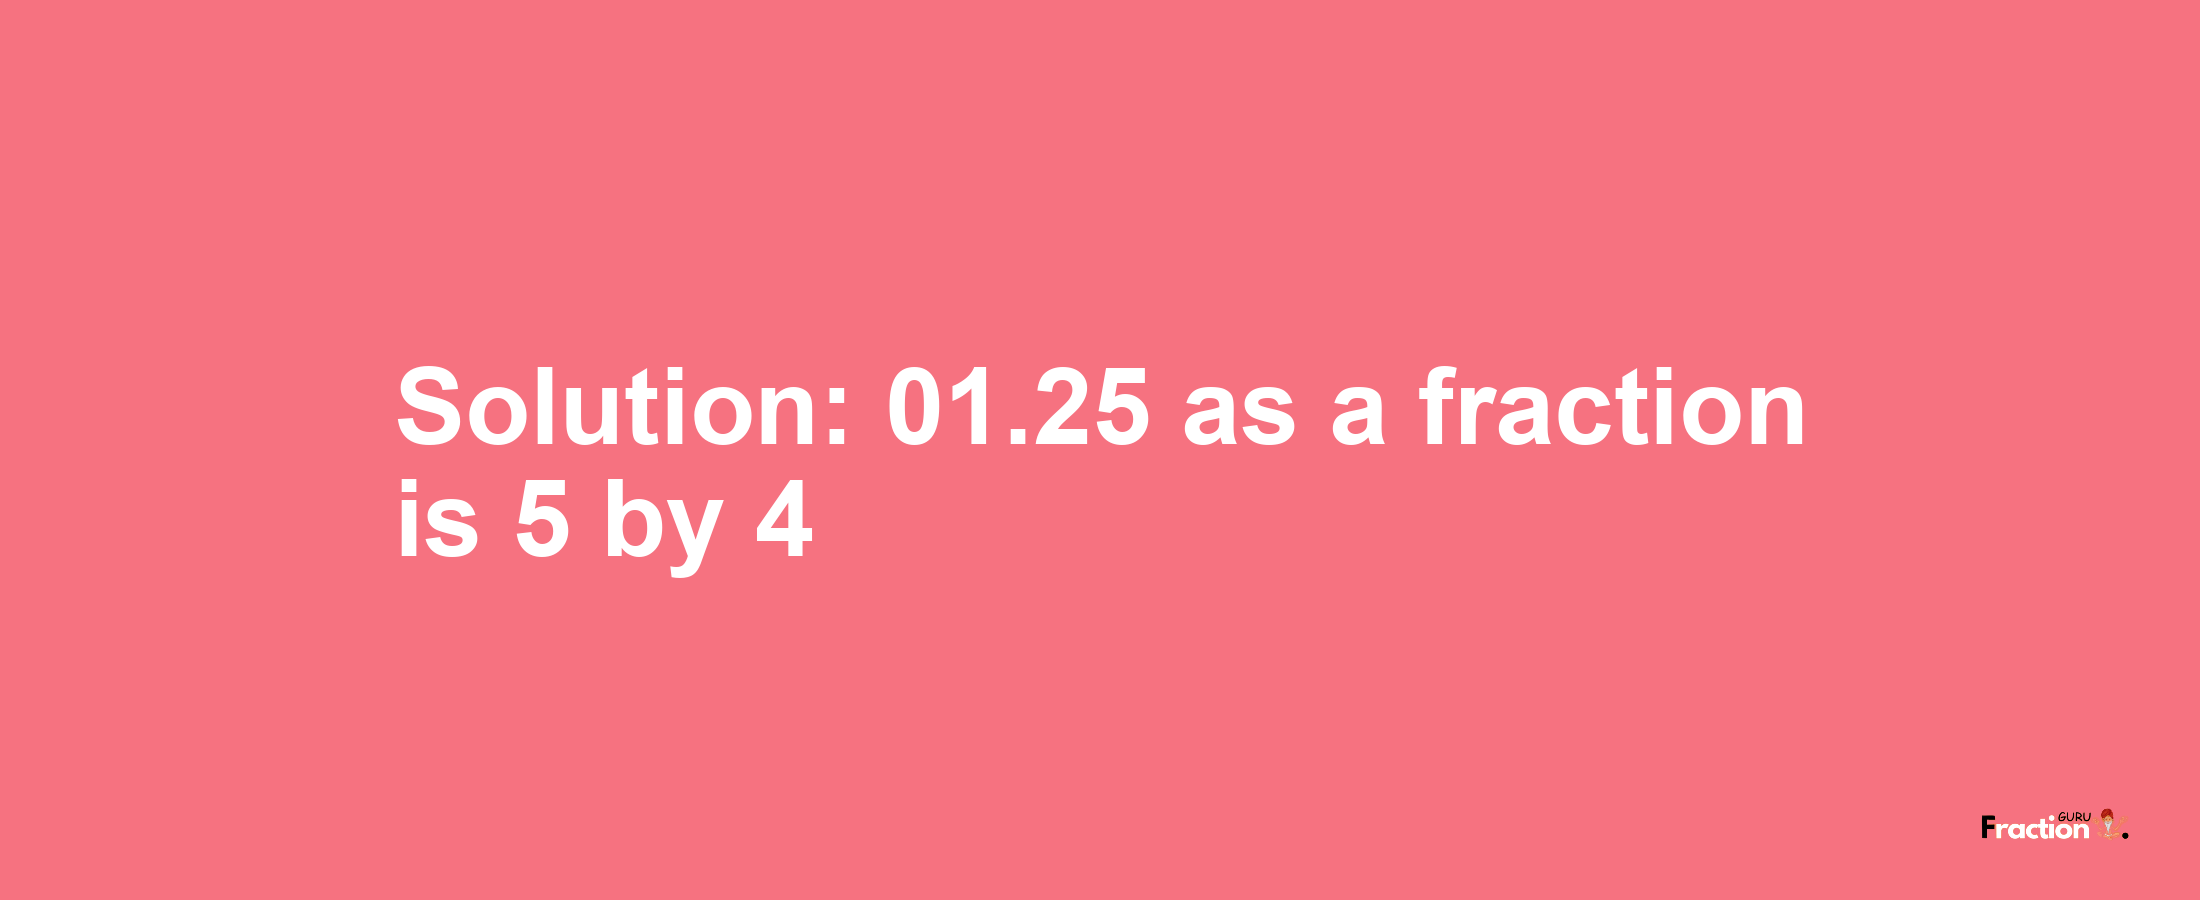 Solution:01.25 as a fraction is 5/4